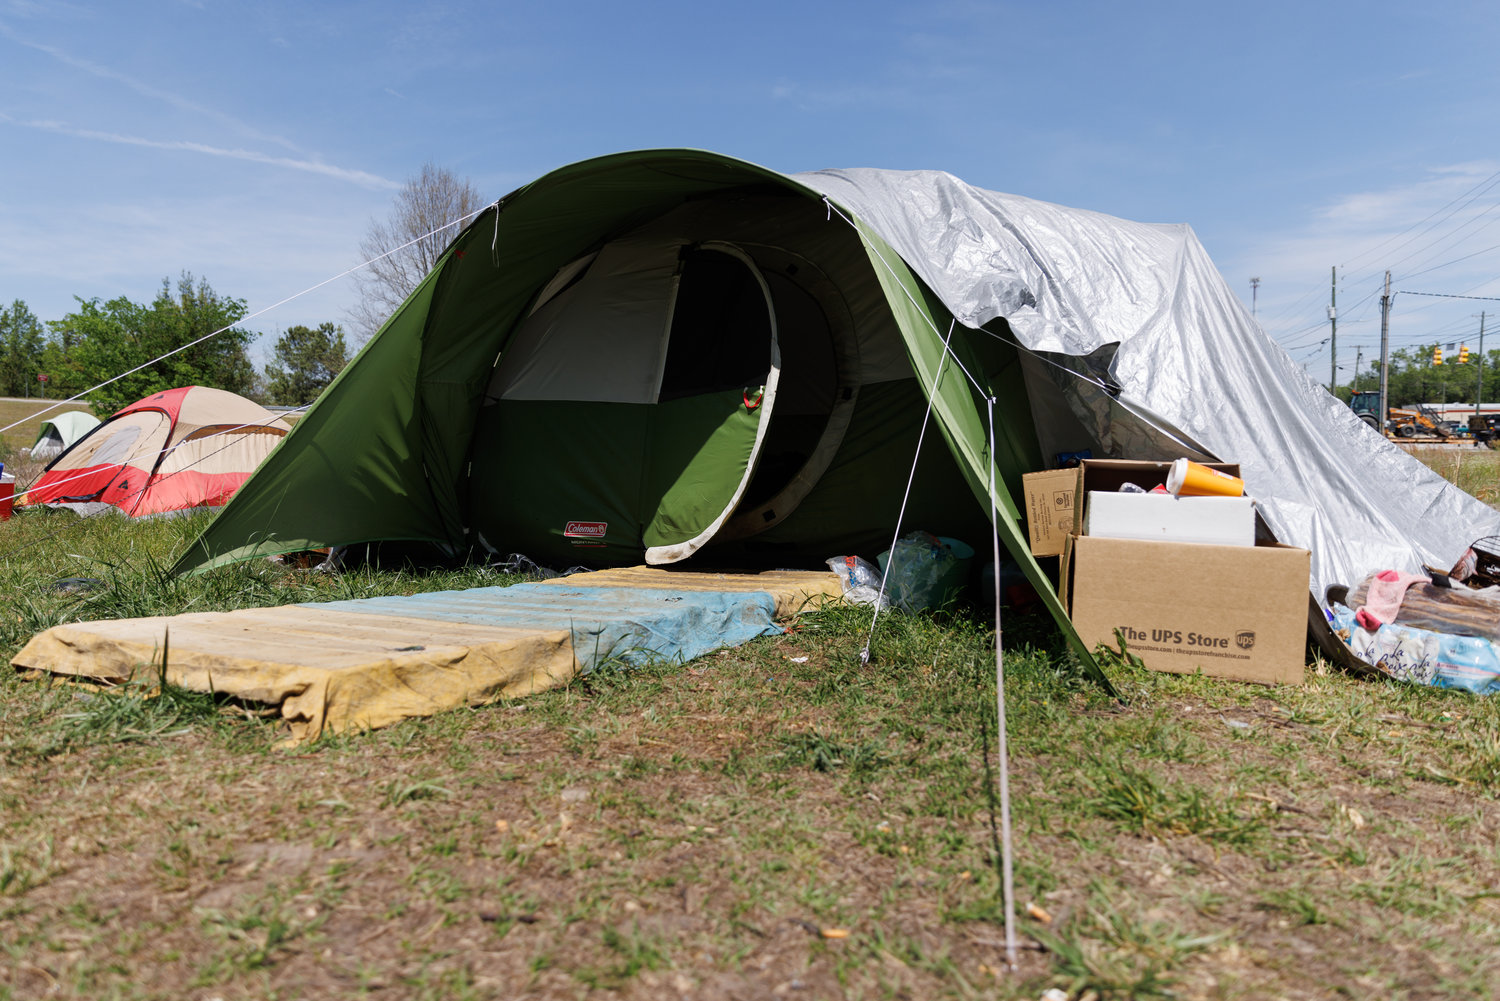 A homeless encampment is set up off Gillespie Street. The City Council is expected to discuss homeless encampments during a work session Monday.